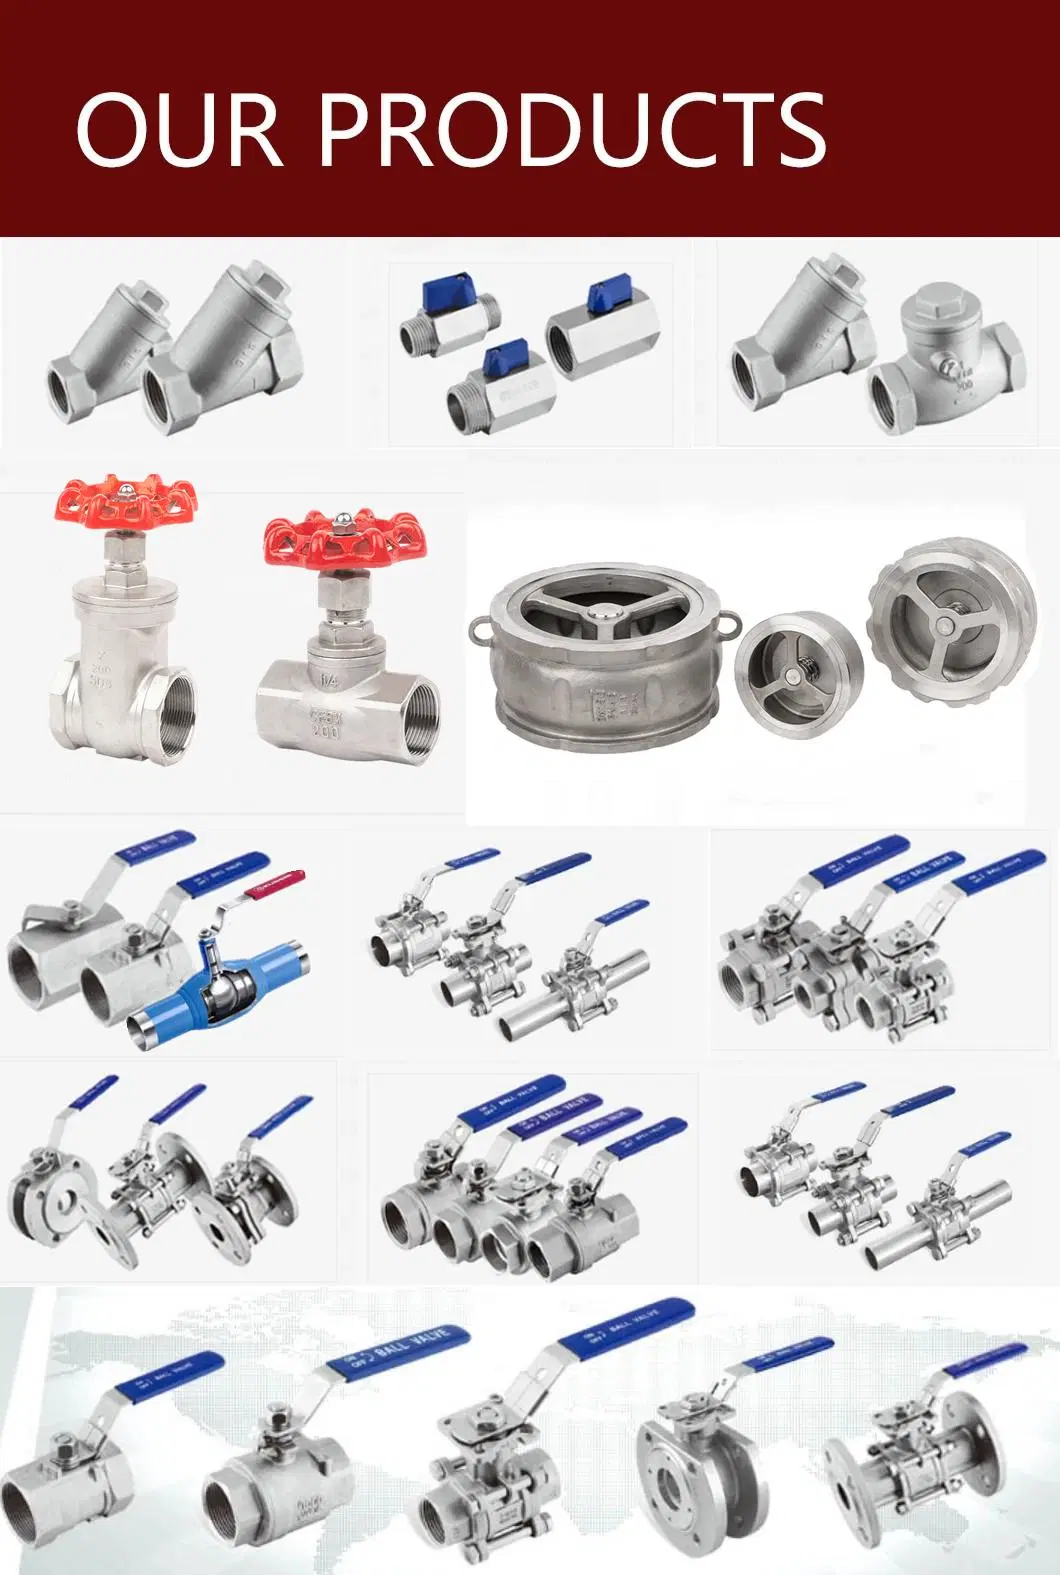 Investment Casted 2PC JIS/ANSI Flanged Stainless Steel SS304/SS316 Pneumatic Actuated Industrial Valve, Gate/Check/Water/ Globe/Ball Valve 10K 20K